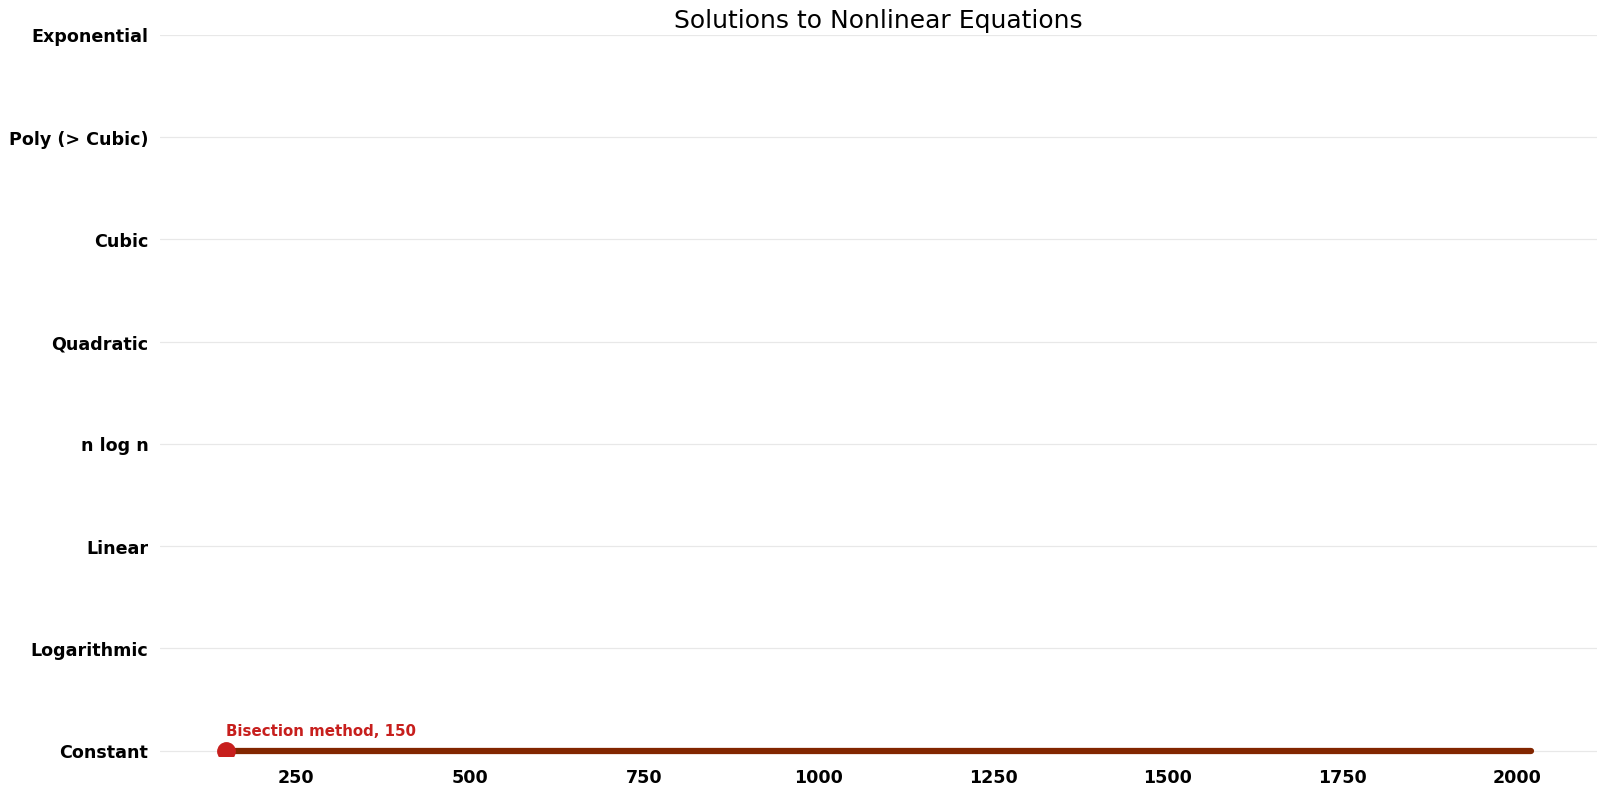 File:Solutions to Nonlinear Equations - Space.png